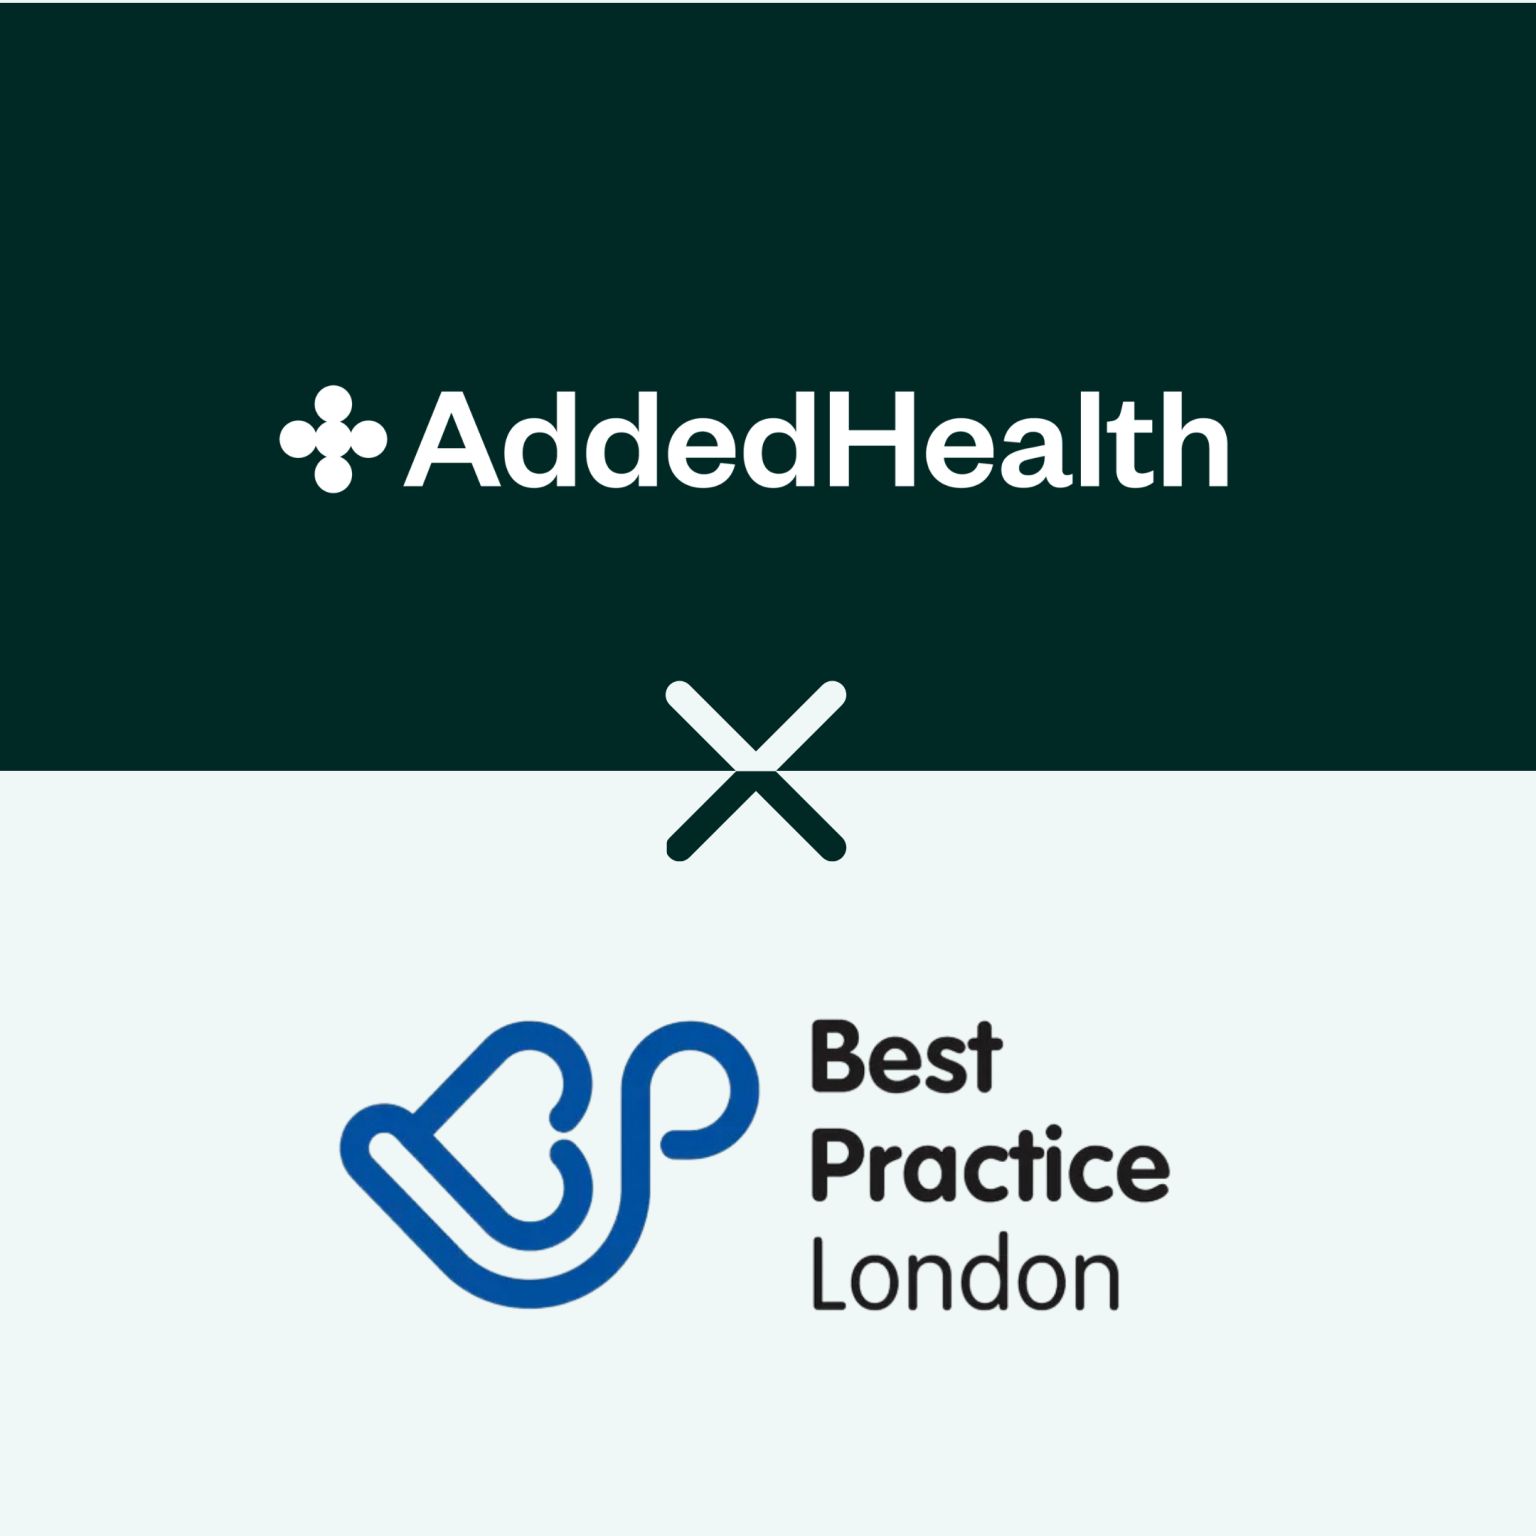 Added Health is attending Best Practice London